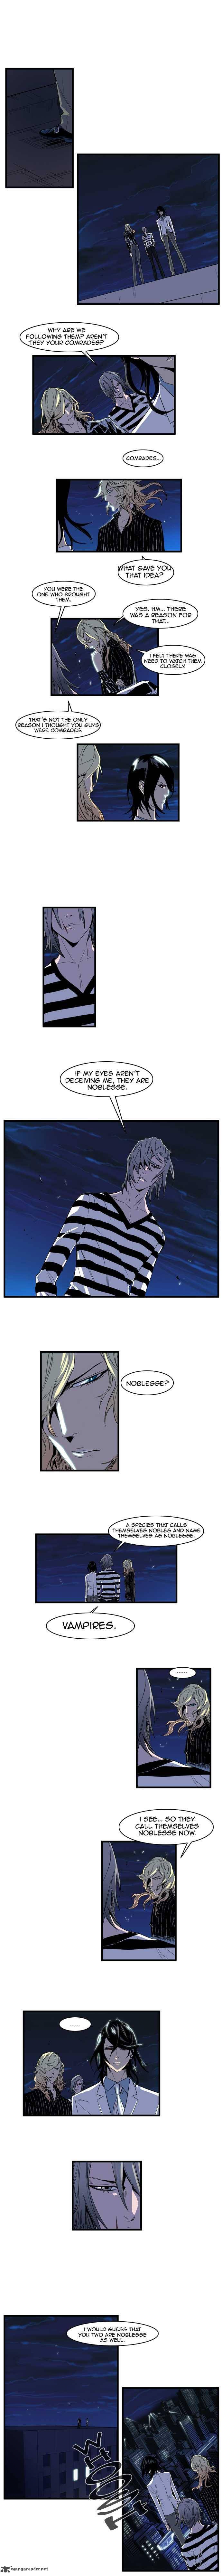 Noblesse 101 2